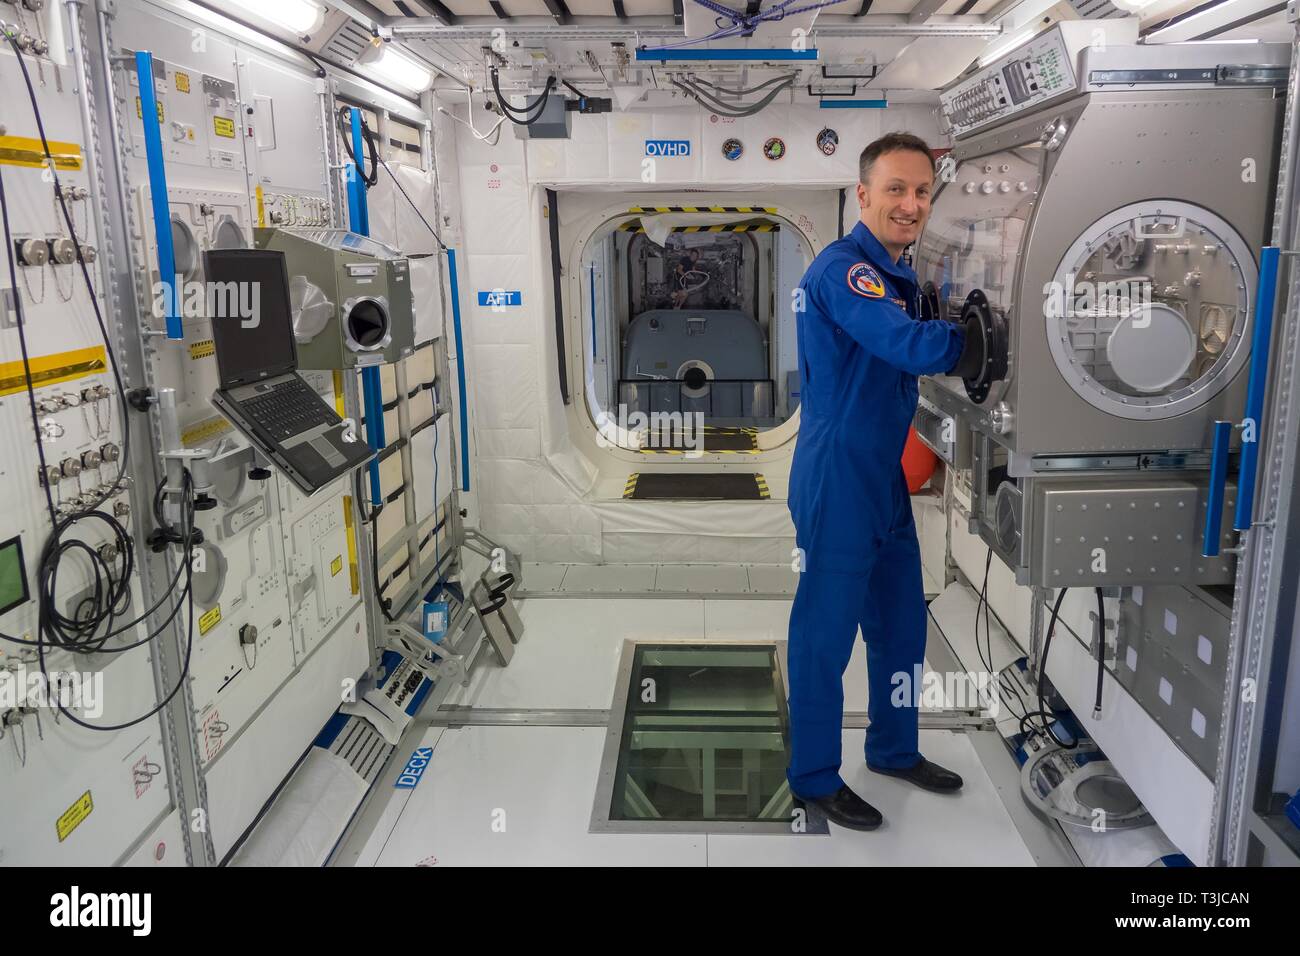 Matthias Maurer, Astronaut, at SpaceShip EAC, Training Center for Astronauts, Cologne, Germany Stock Photo